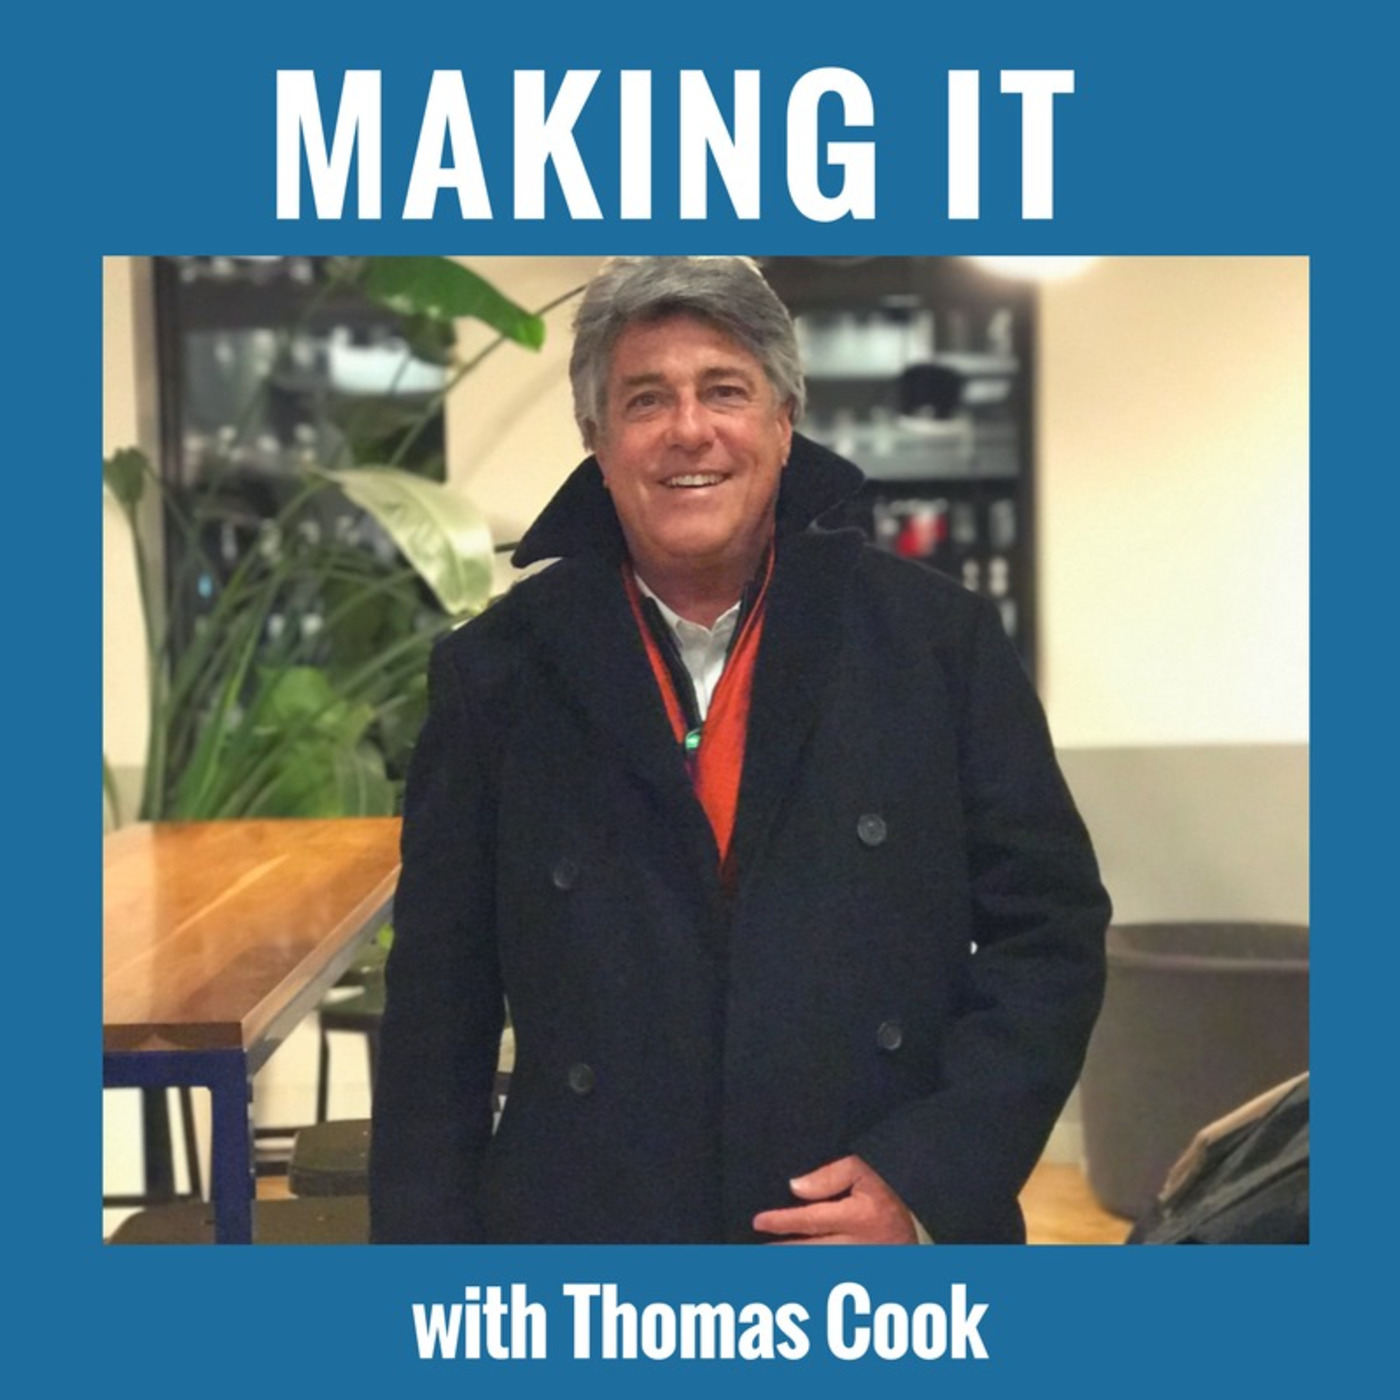 Making It with Thomas Cook